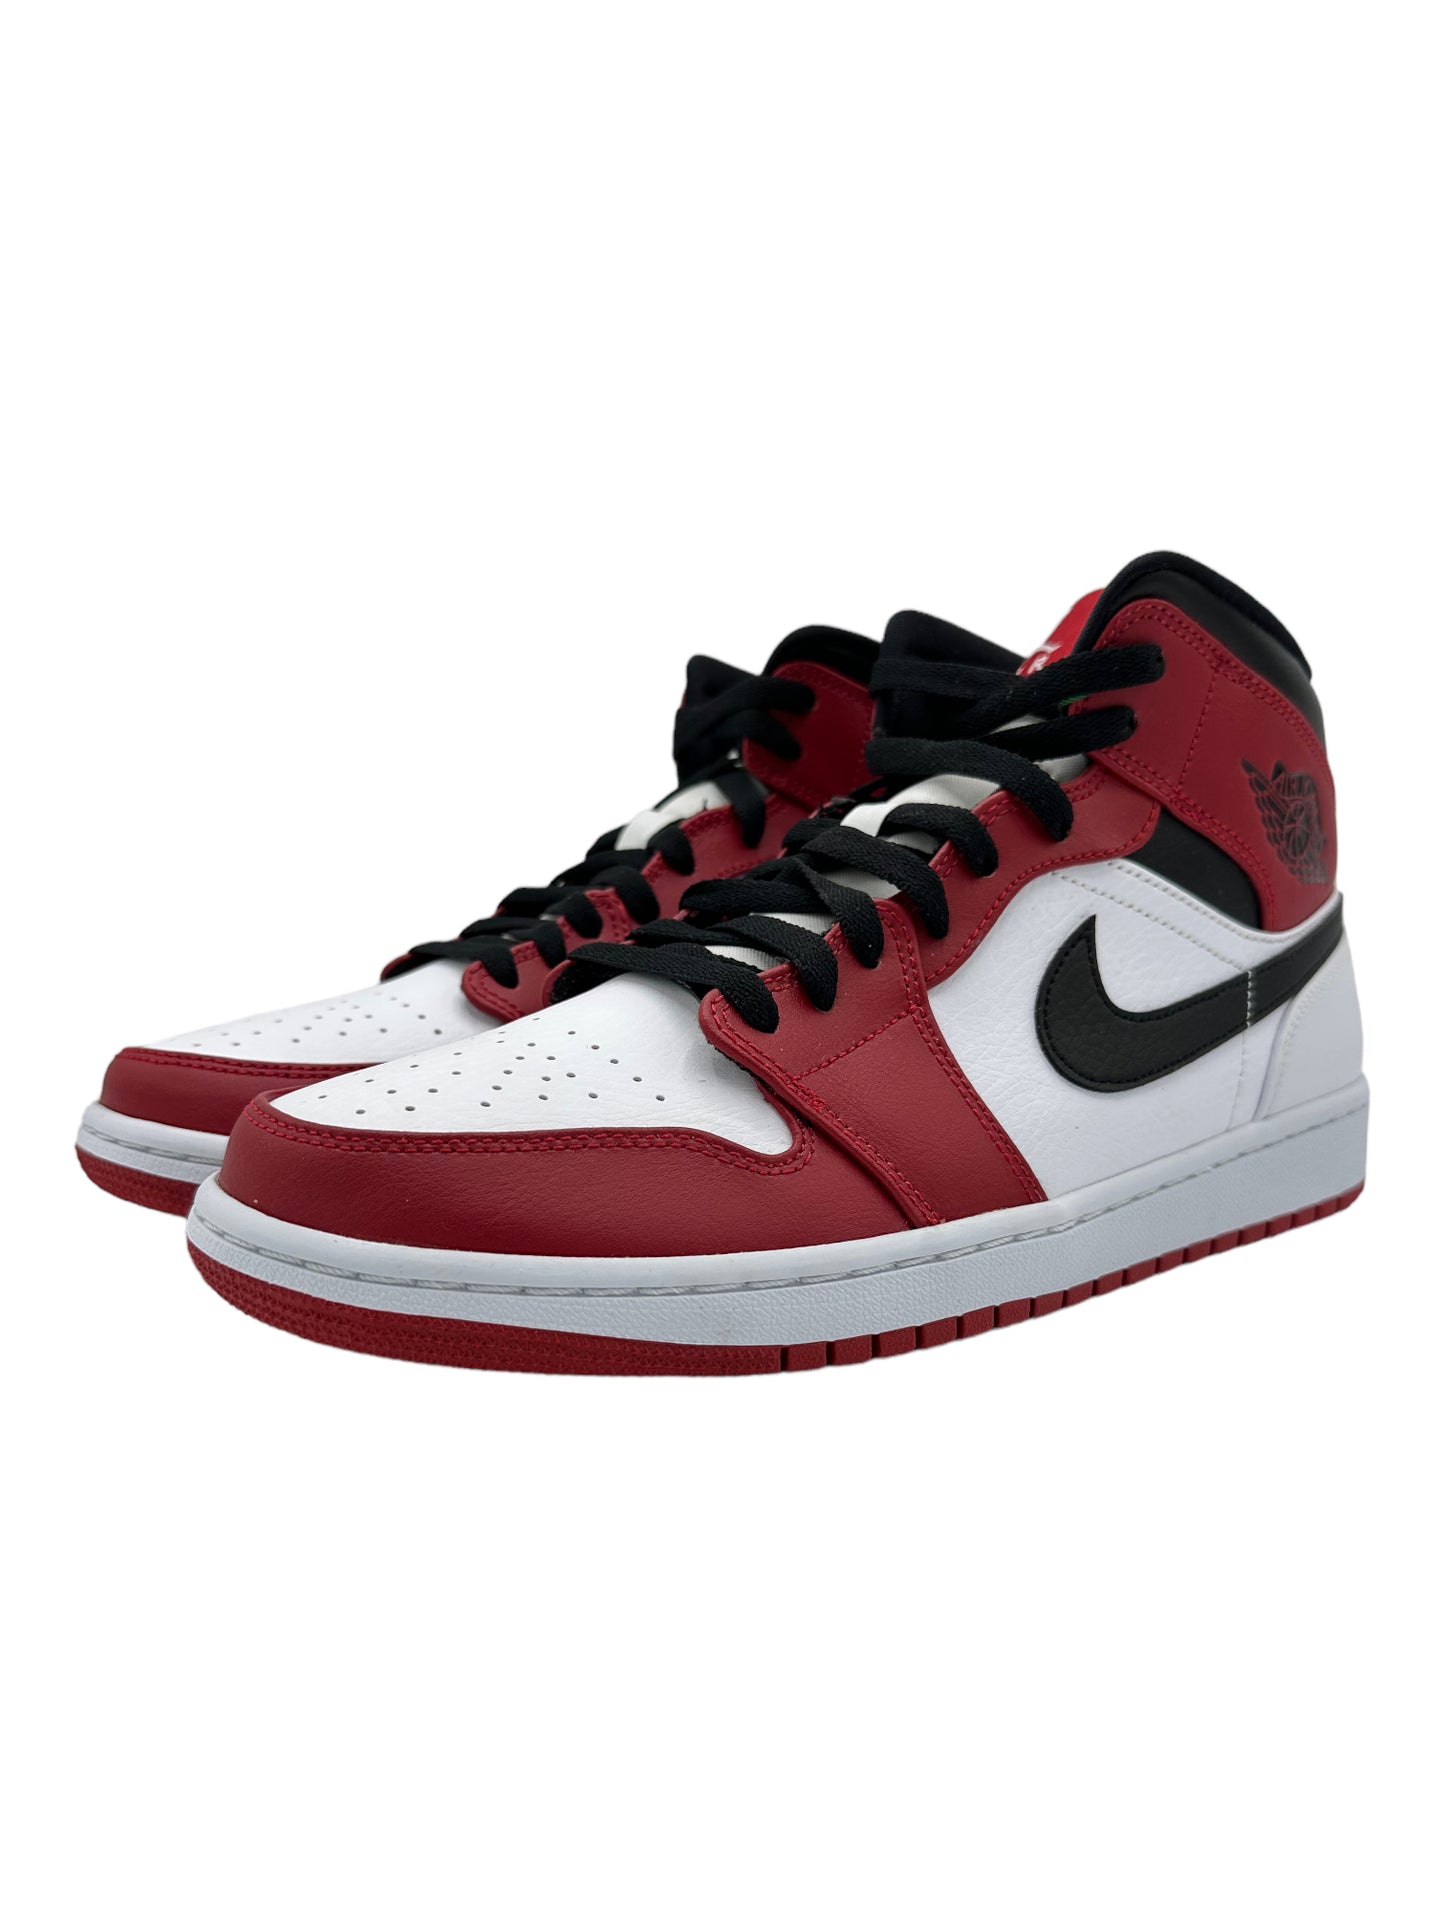 Nike Air Jordan 1 Mid Chicago White Heel Sneakers - Genuine Design Luxury Consignment for Men. New & Pre-Owned Clothing, Shoes, & Accessories. Calgary, Canada